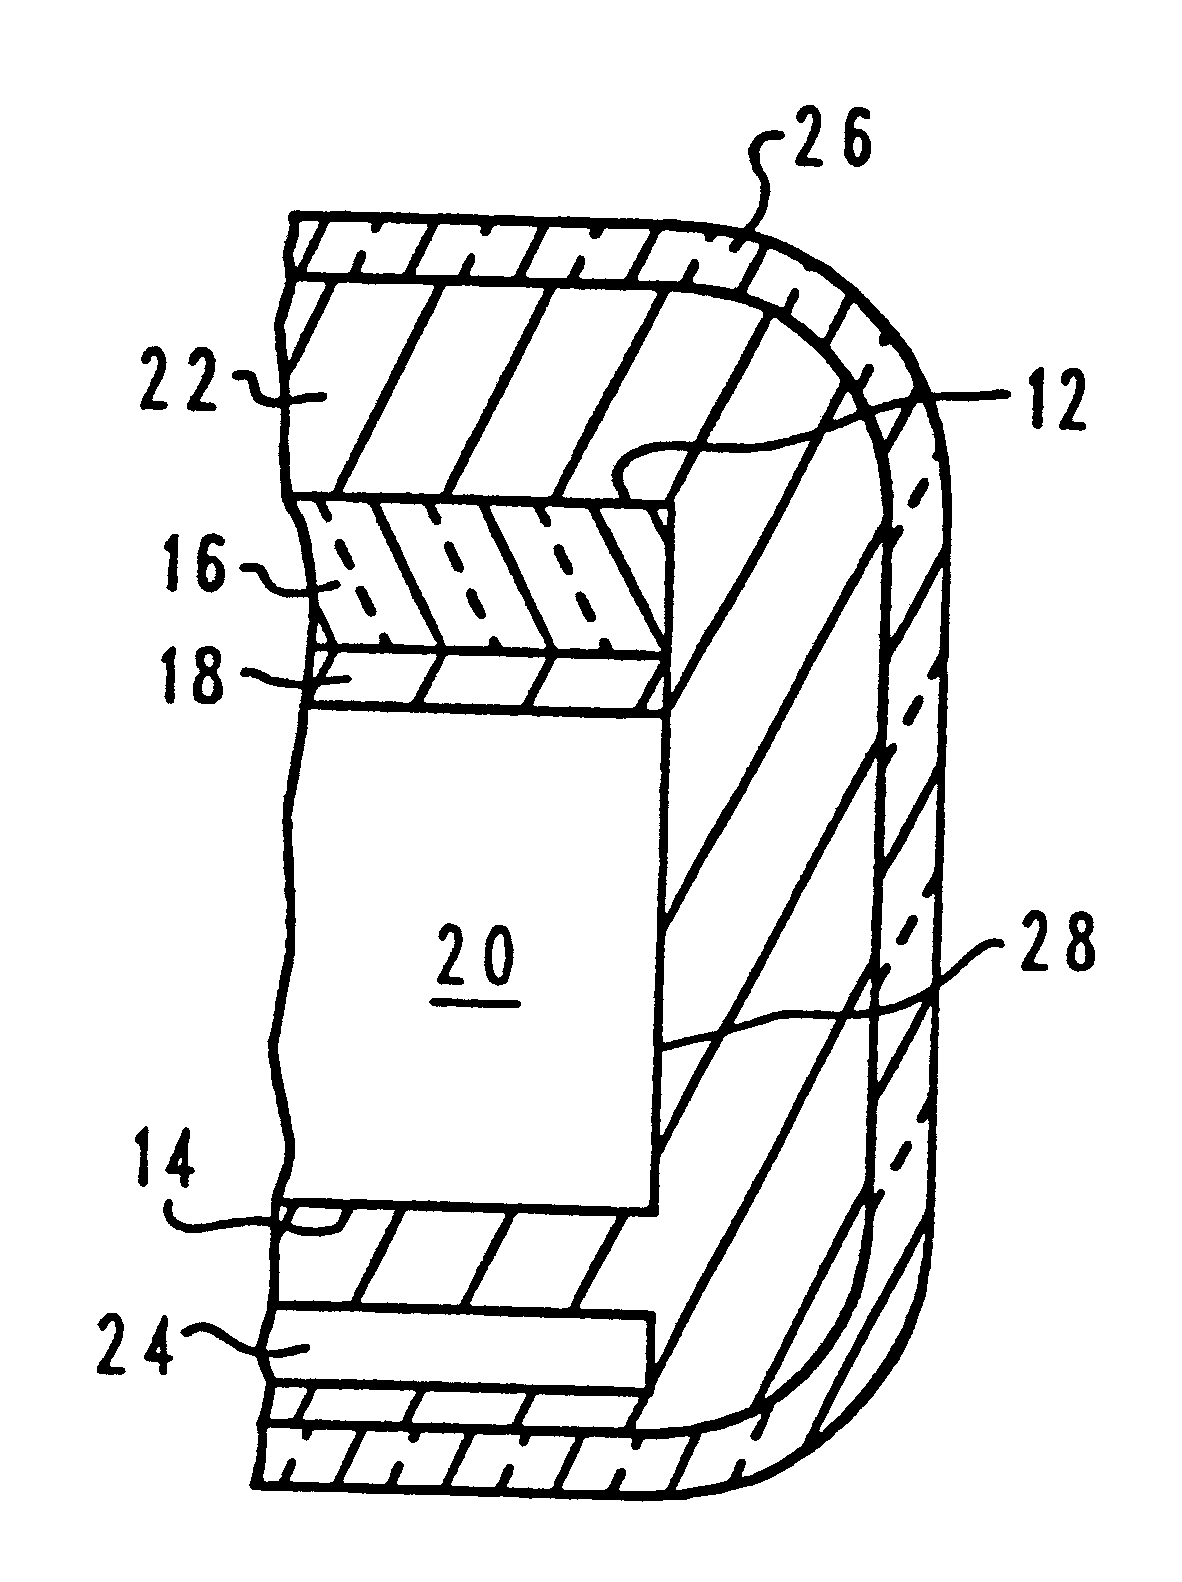 Silicon-on-insulator wafer having conductive layer for detection with electrical sensors